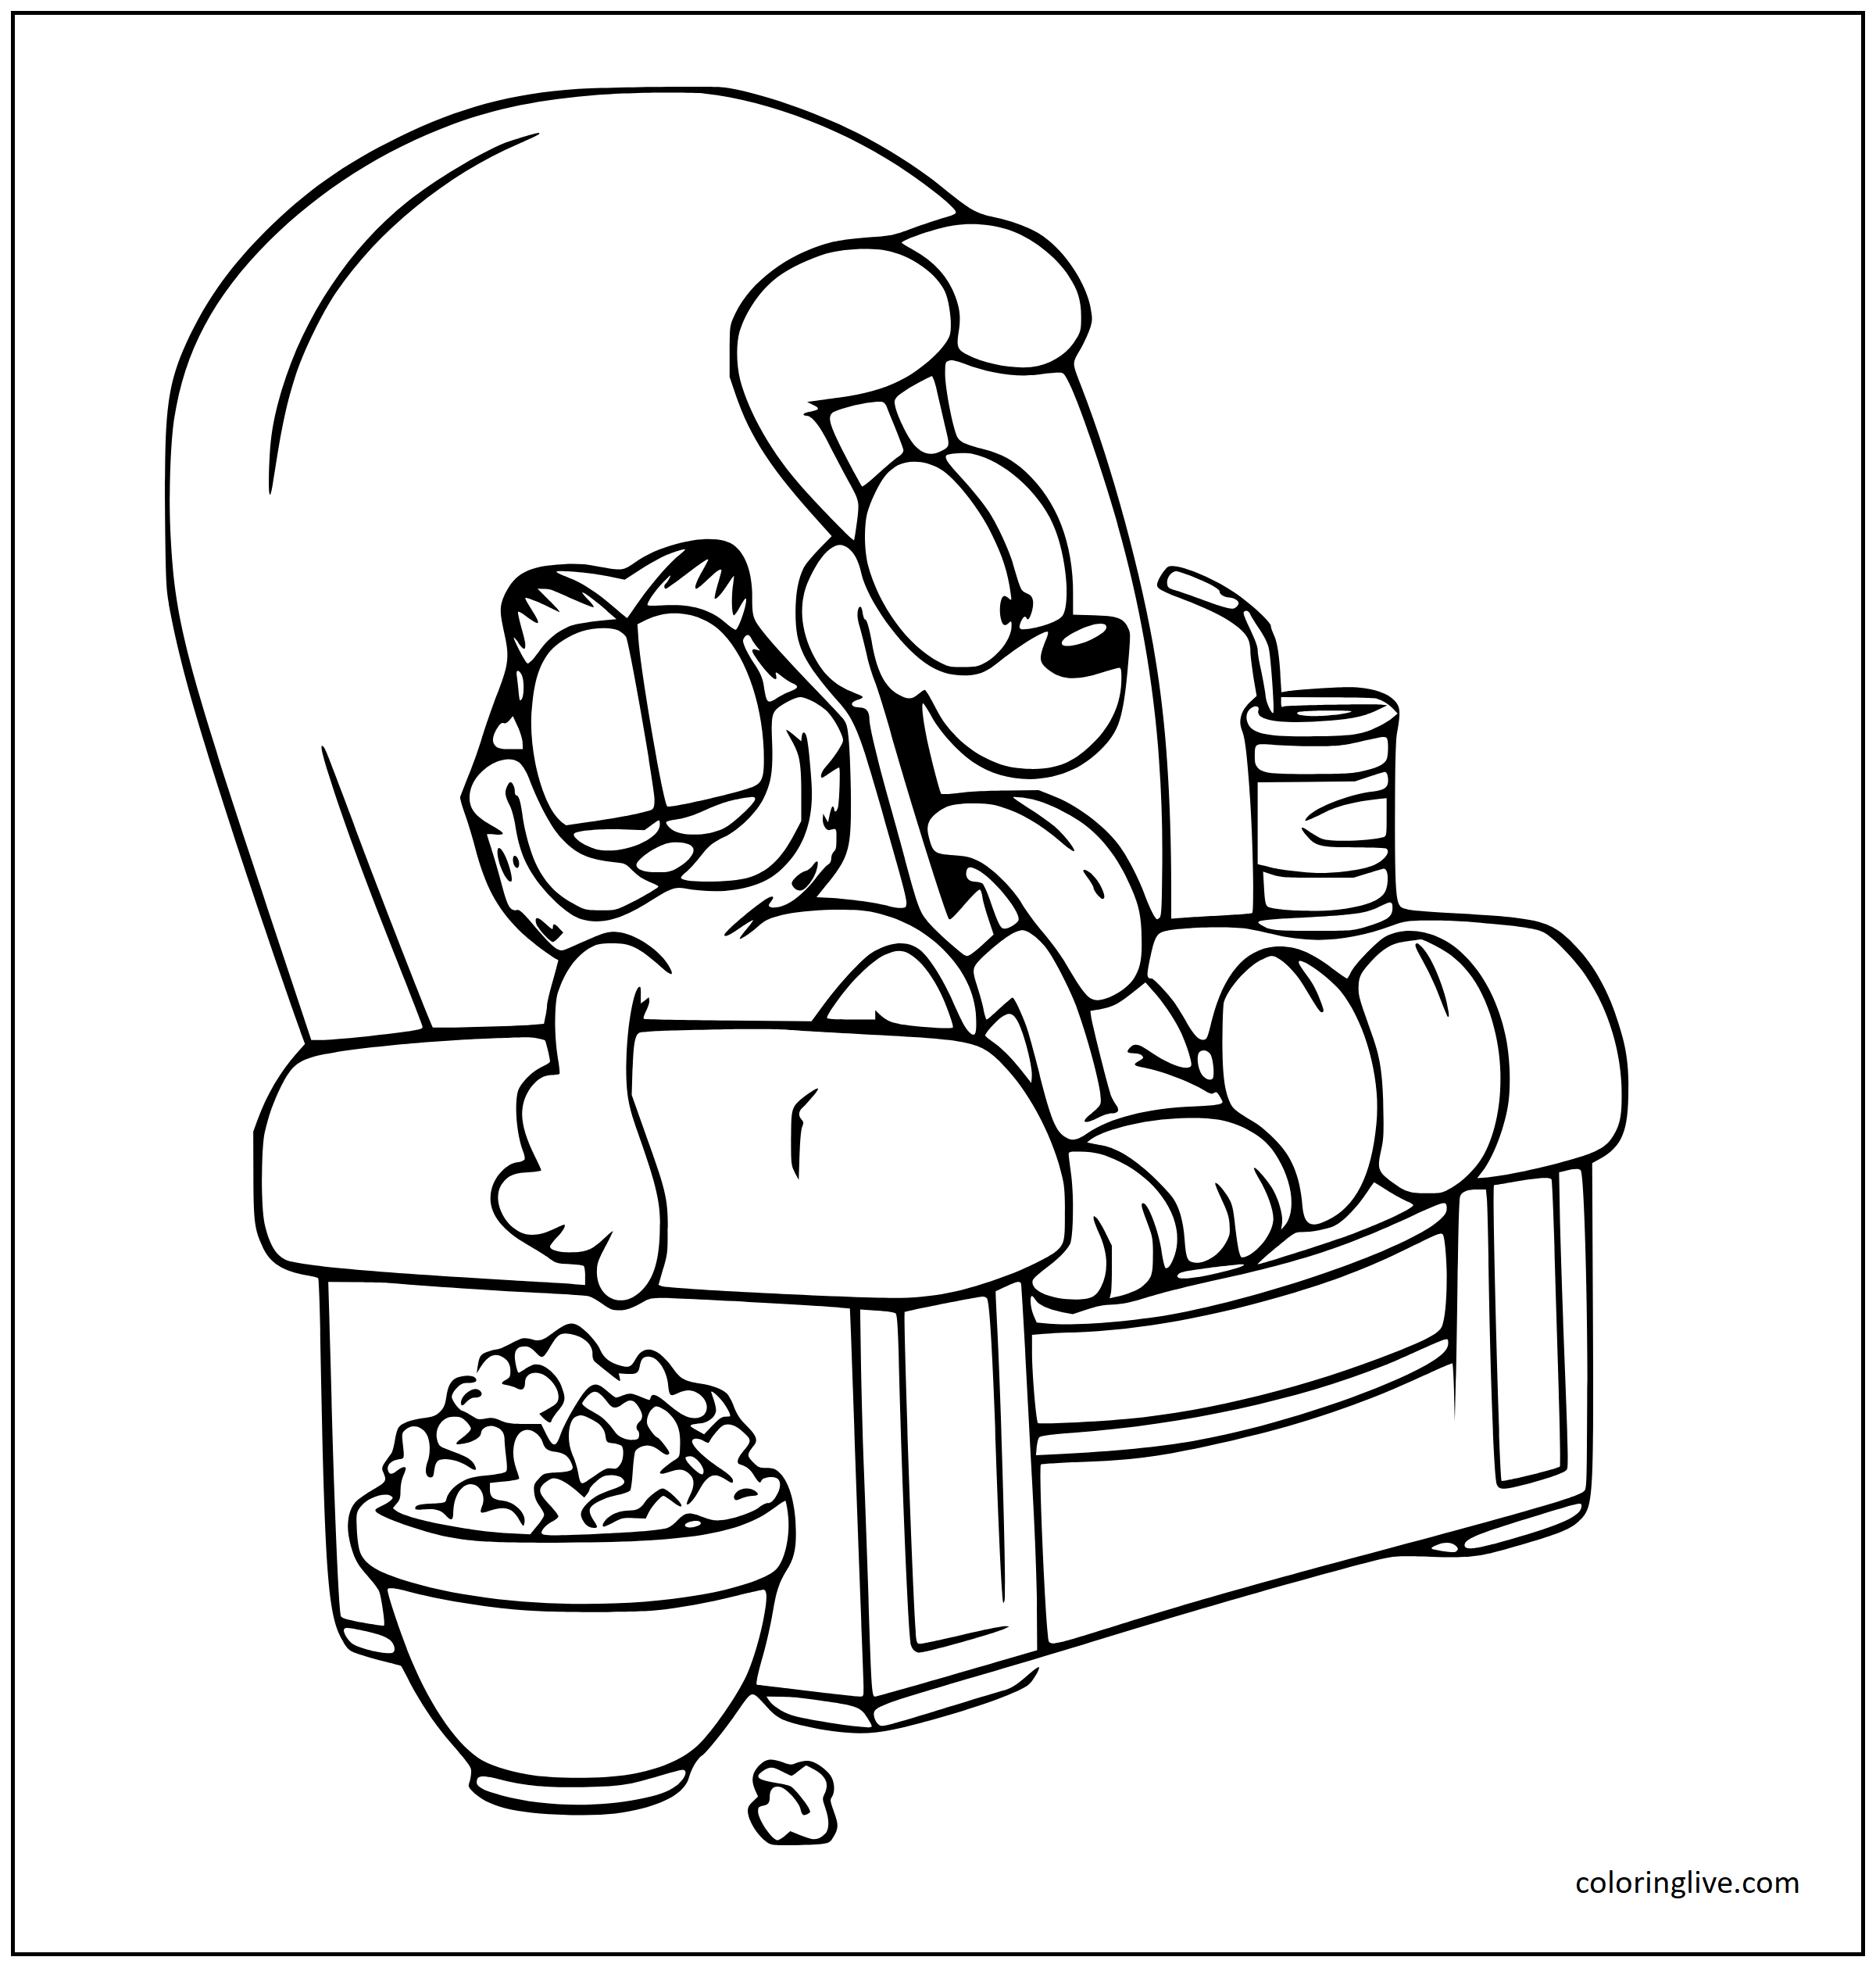 Printable Garfield Odie watching tv Coloring Page for kids.